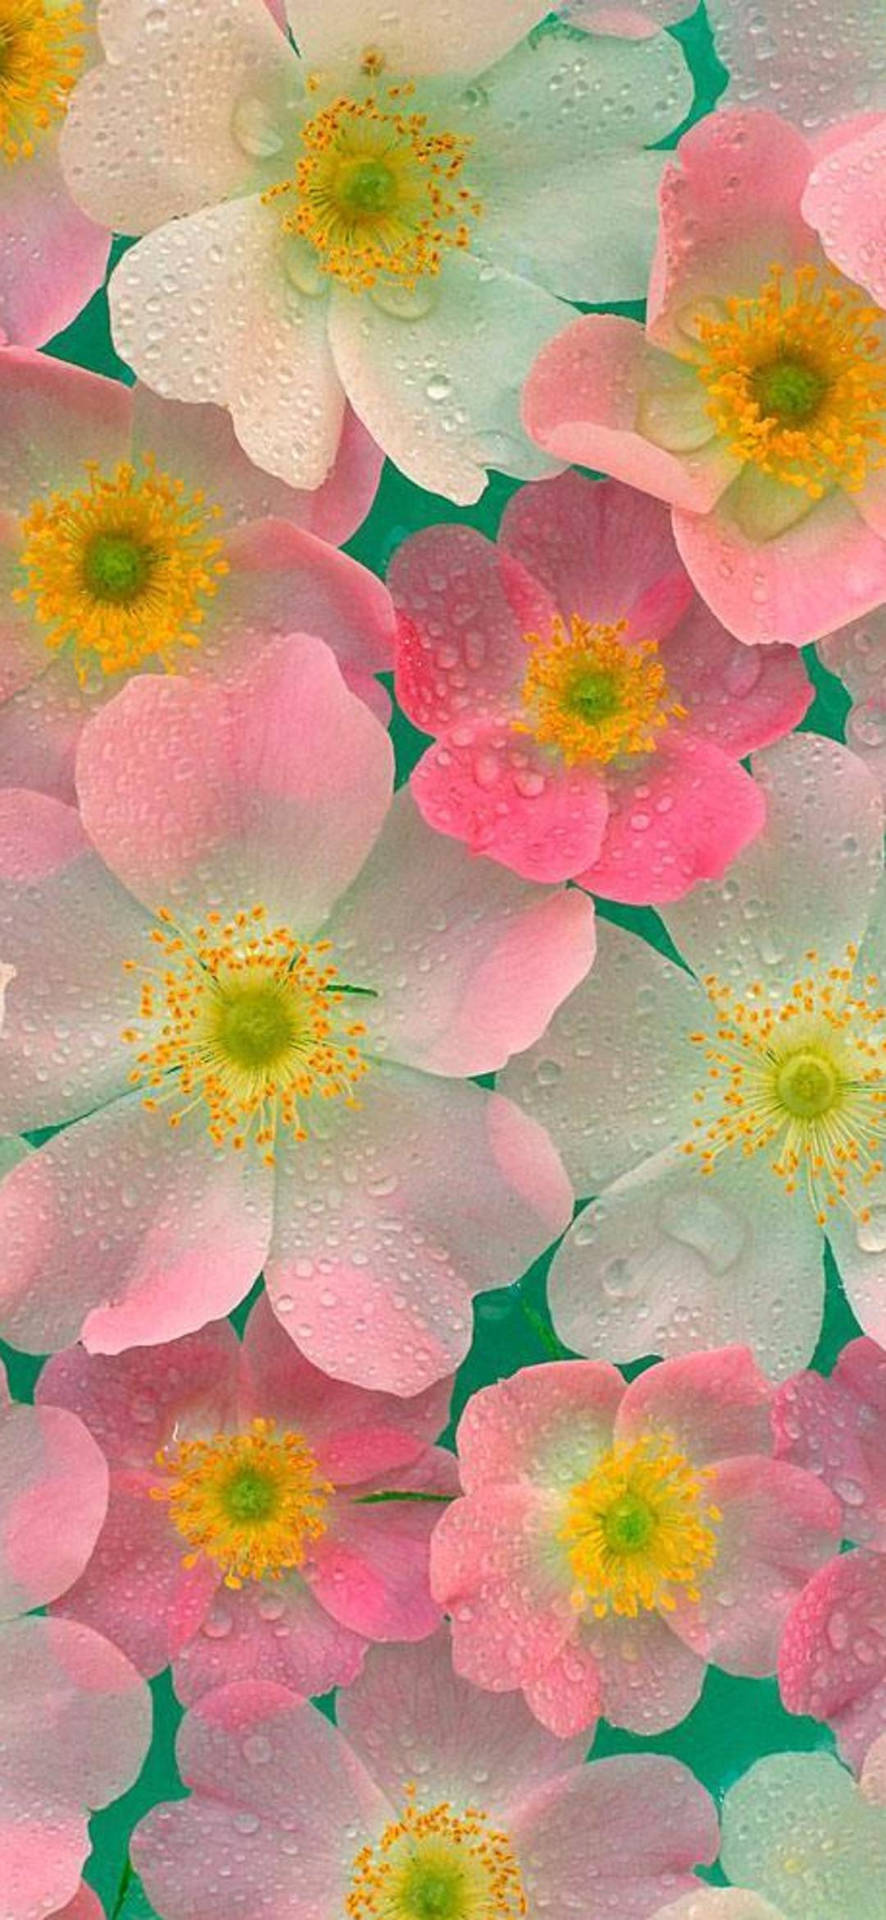 Buy Dainty Daisy 48X30In SelfAdhesive Wallpaper at 19 OFF by Shaakh   Pepperfry